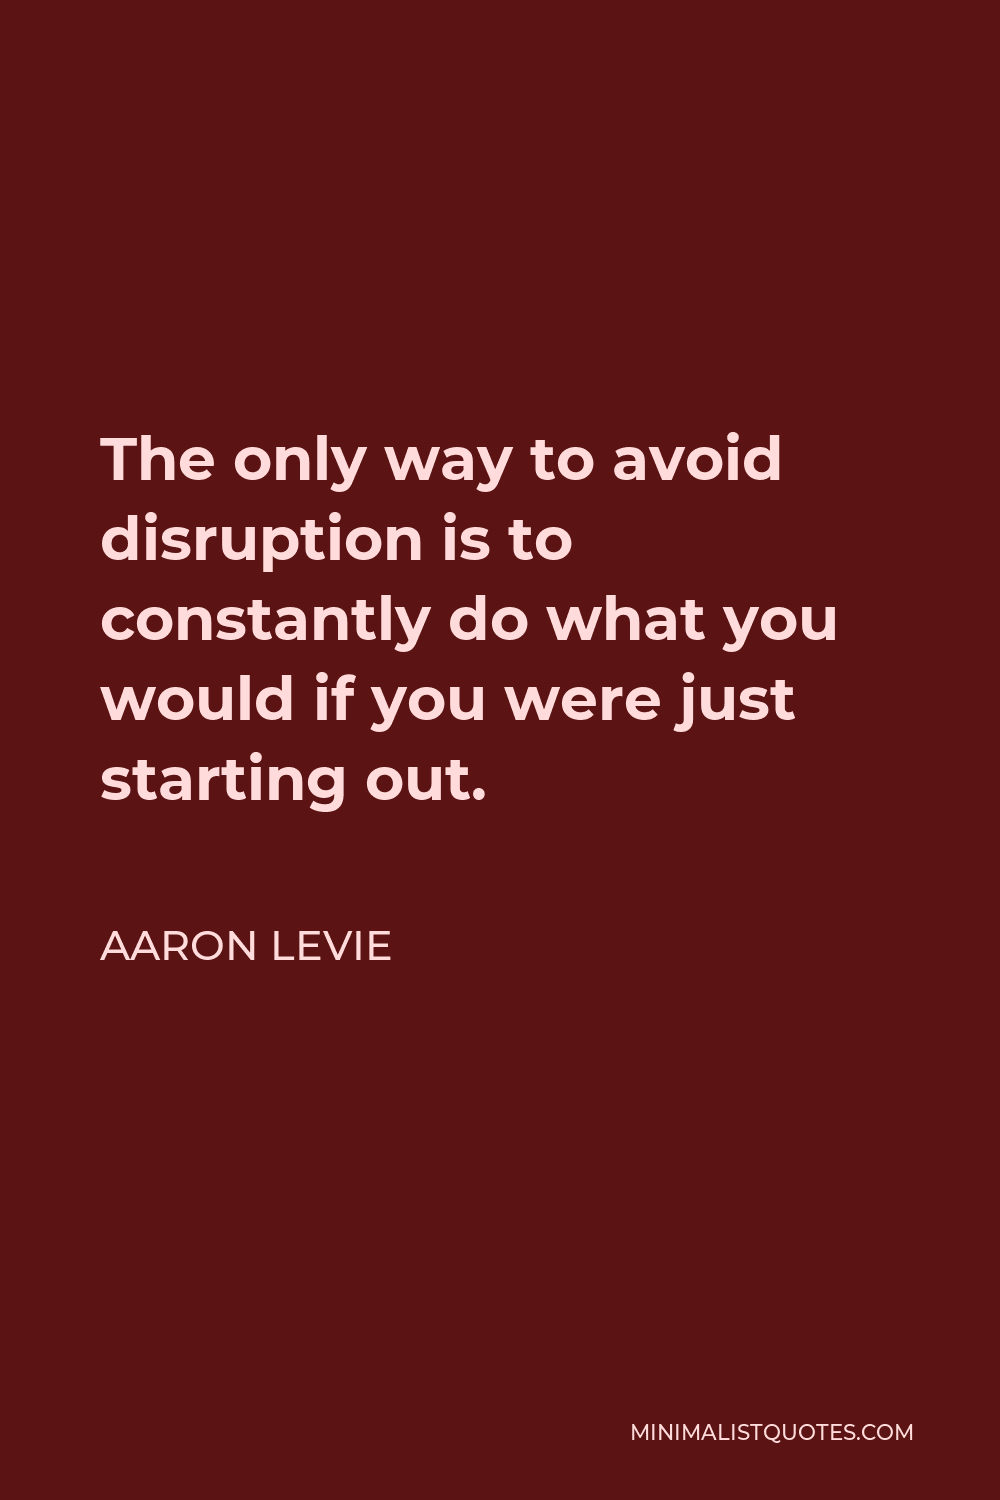 Aaron Levie Quote - The only way to avoid disruption is to constantly do what you would if you were just starting out.